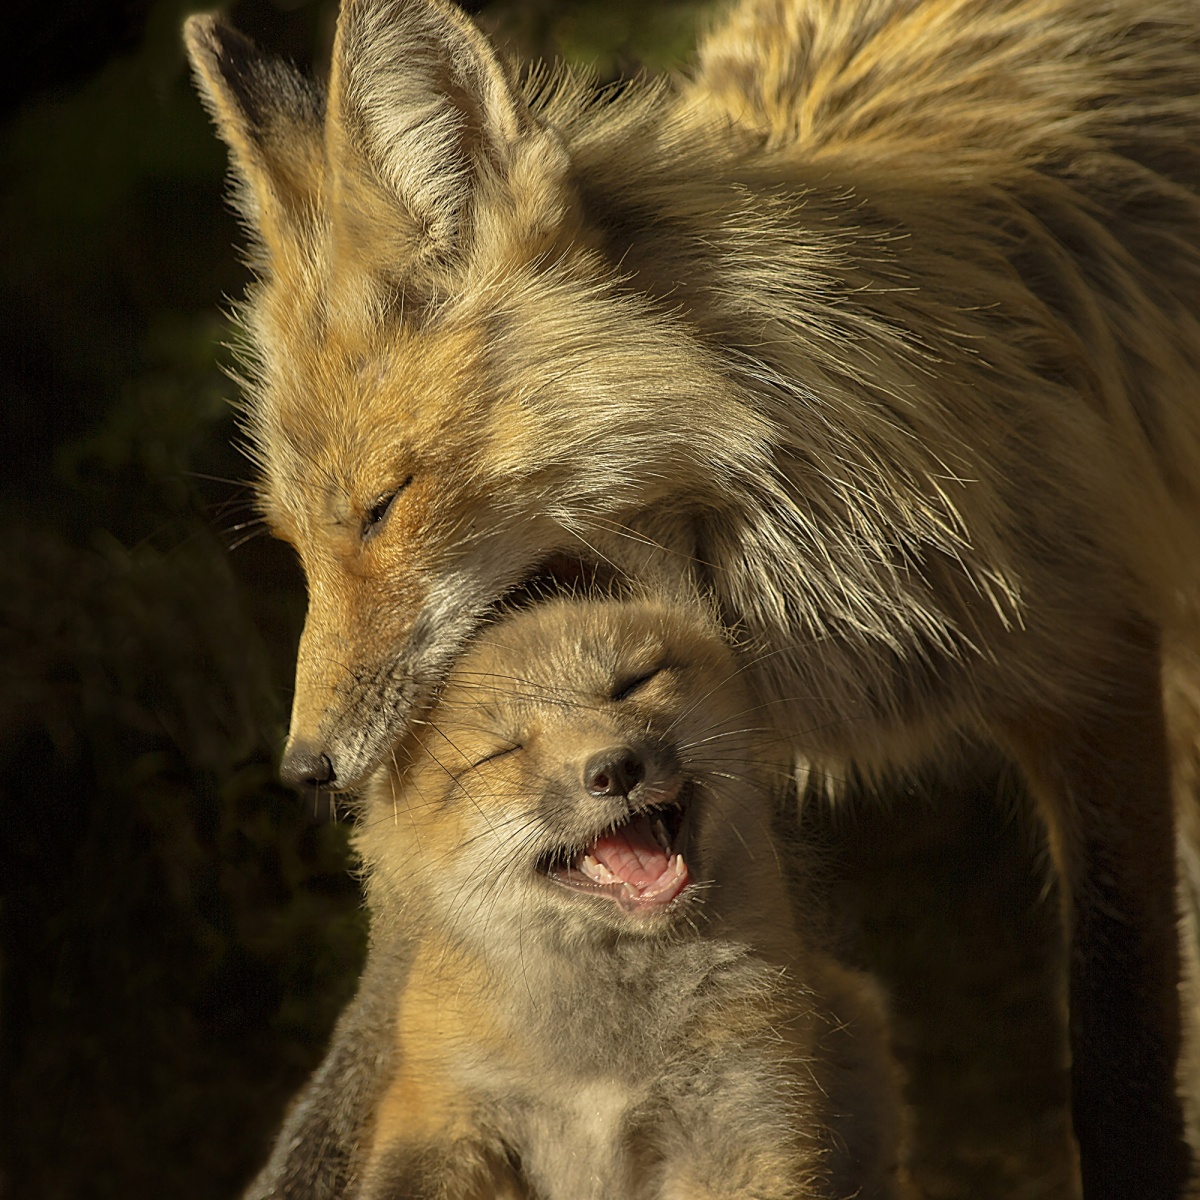 A golden mother fox puts her mouth around the head of her baby. The baby's mouth is open and its pink tongue is sticking out as it sits against a dark background.